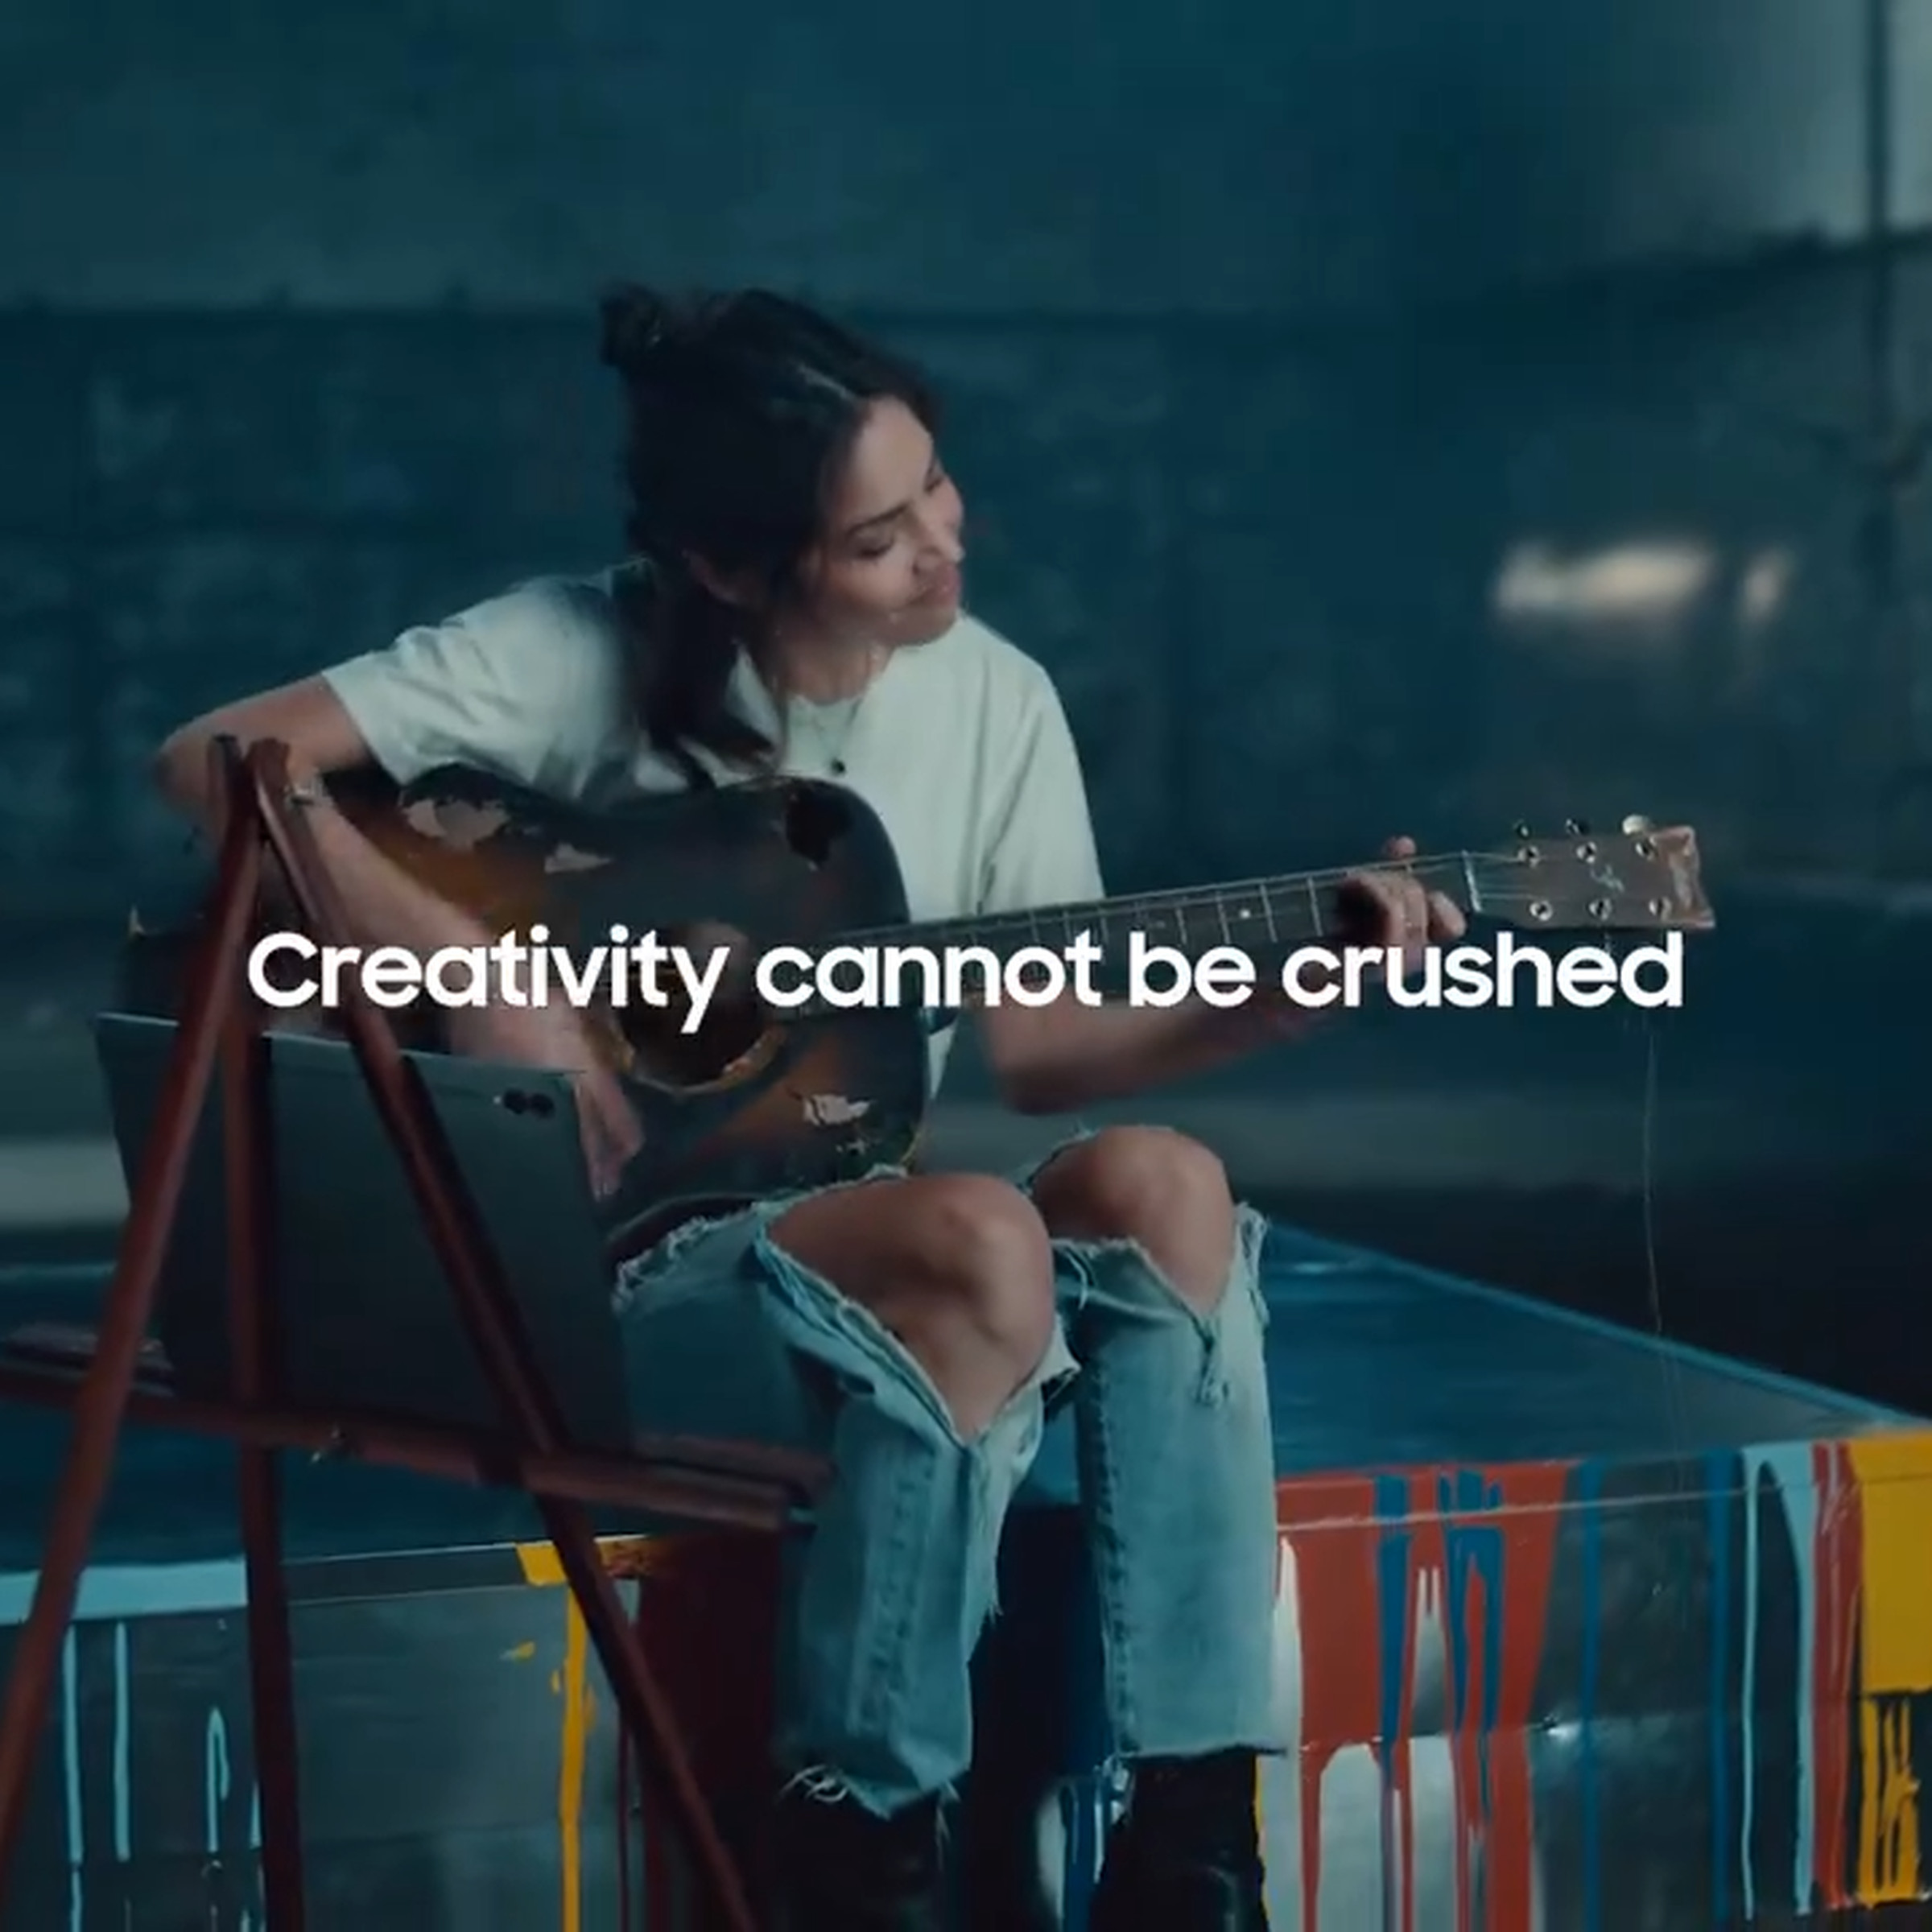 Still image from Samsung “Uncrush” video showing a woman in ripped jeans playing a guitar and the message “Creativity cannot be crushed.”